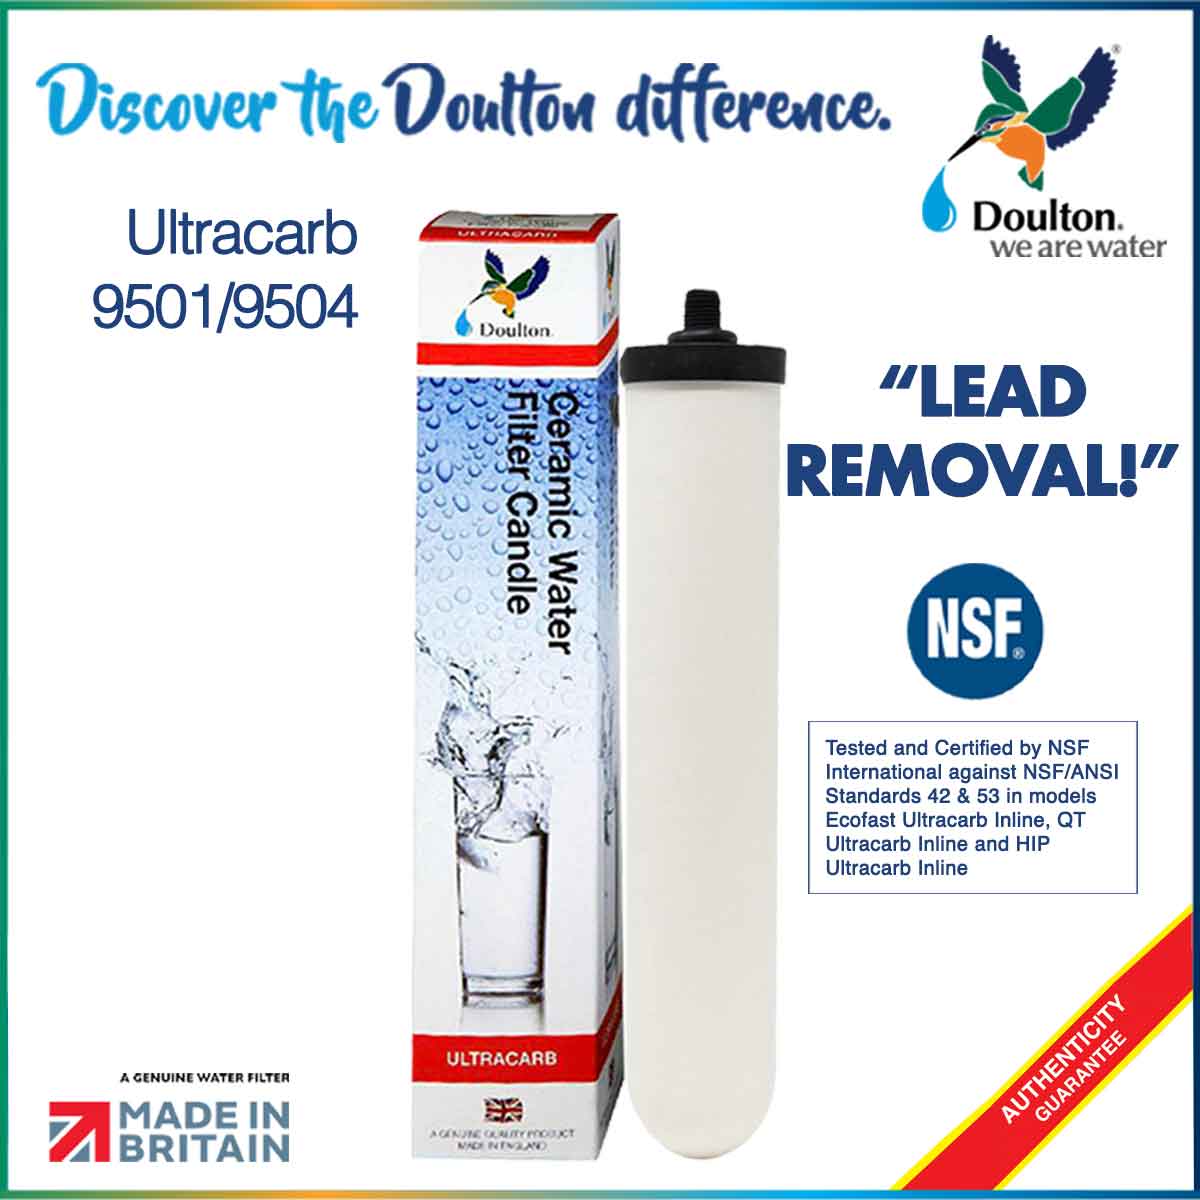 (FREE Installation) Experience the Purity Revolution: Doulton 2X HIP Sterasyl &amp; Ultracarb NSF Certified Inline Undersink Filtration - Pure Water, Simplified System